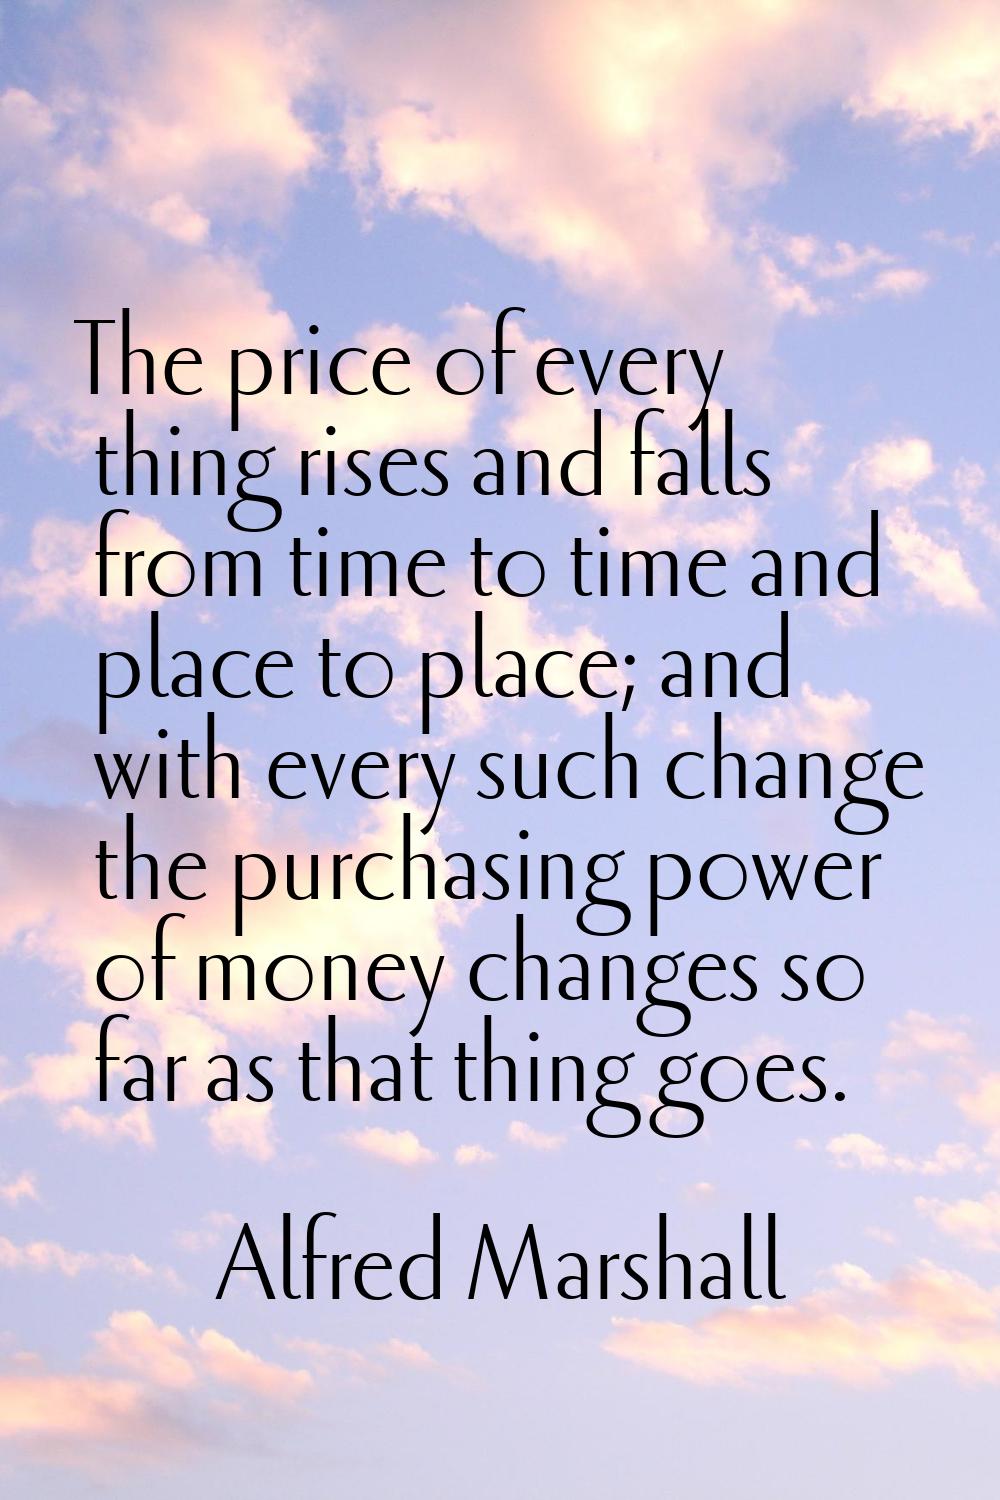 The price of every thing rises and falls from time to time and place to place; and with every such 